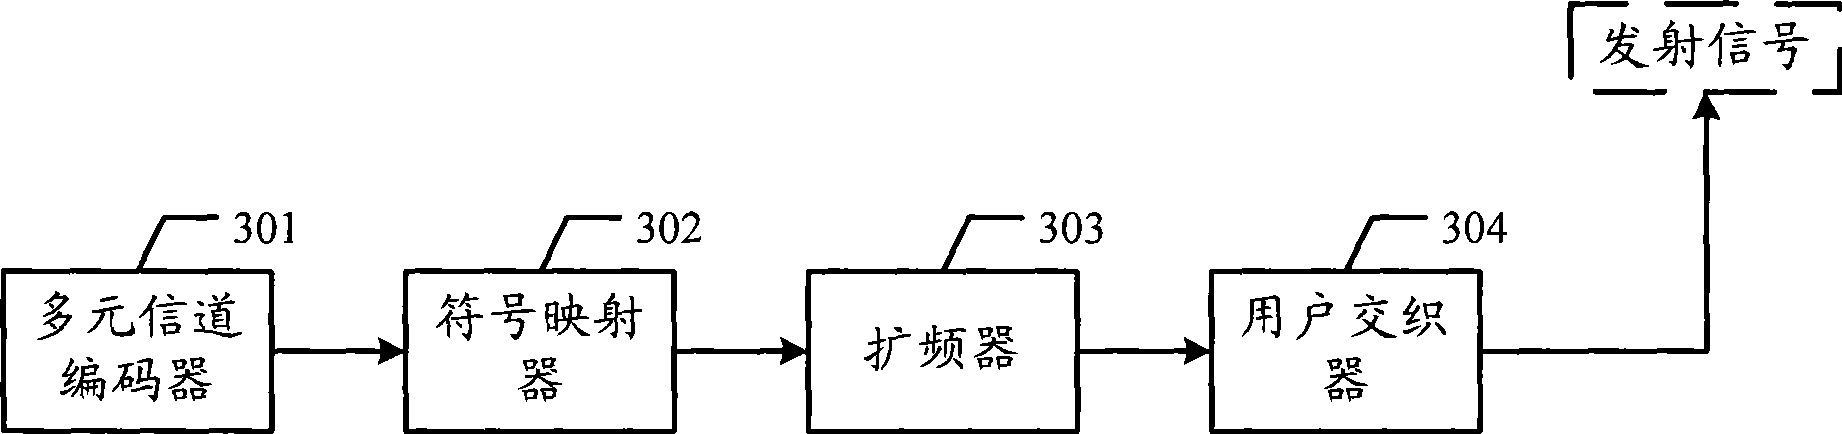 Multi-element error correcting code transmitting and receiving apparatus, data communication system and related method